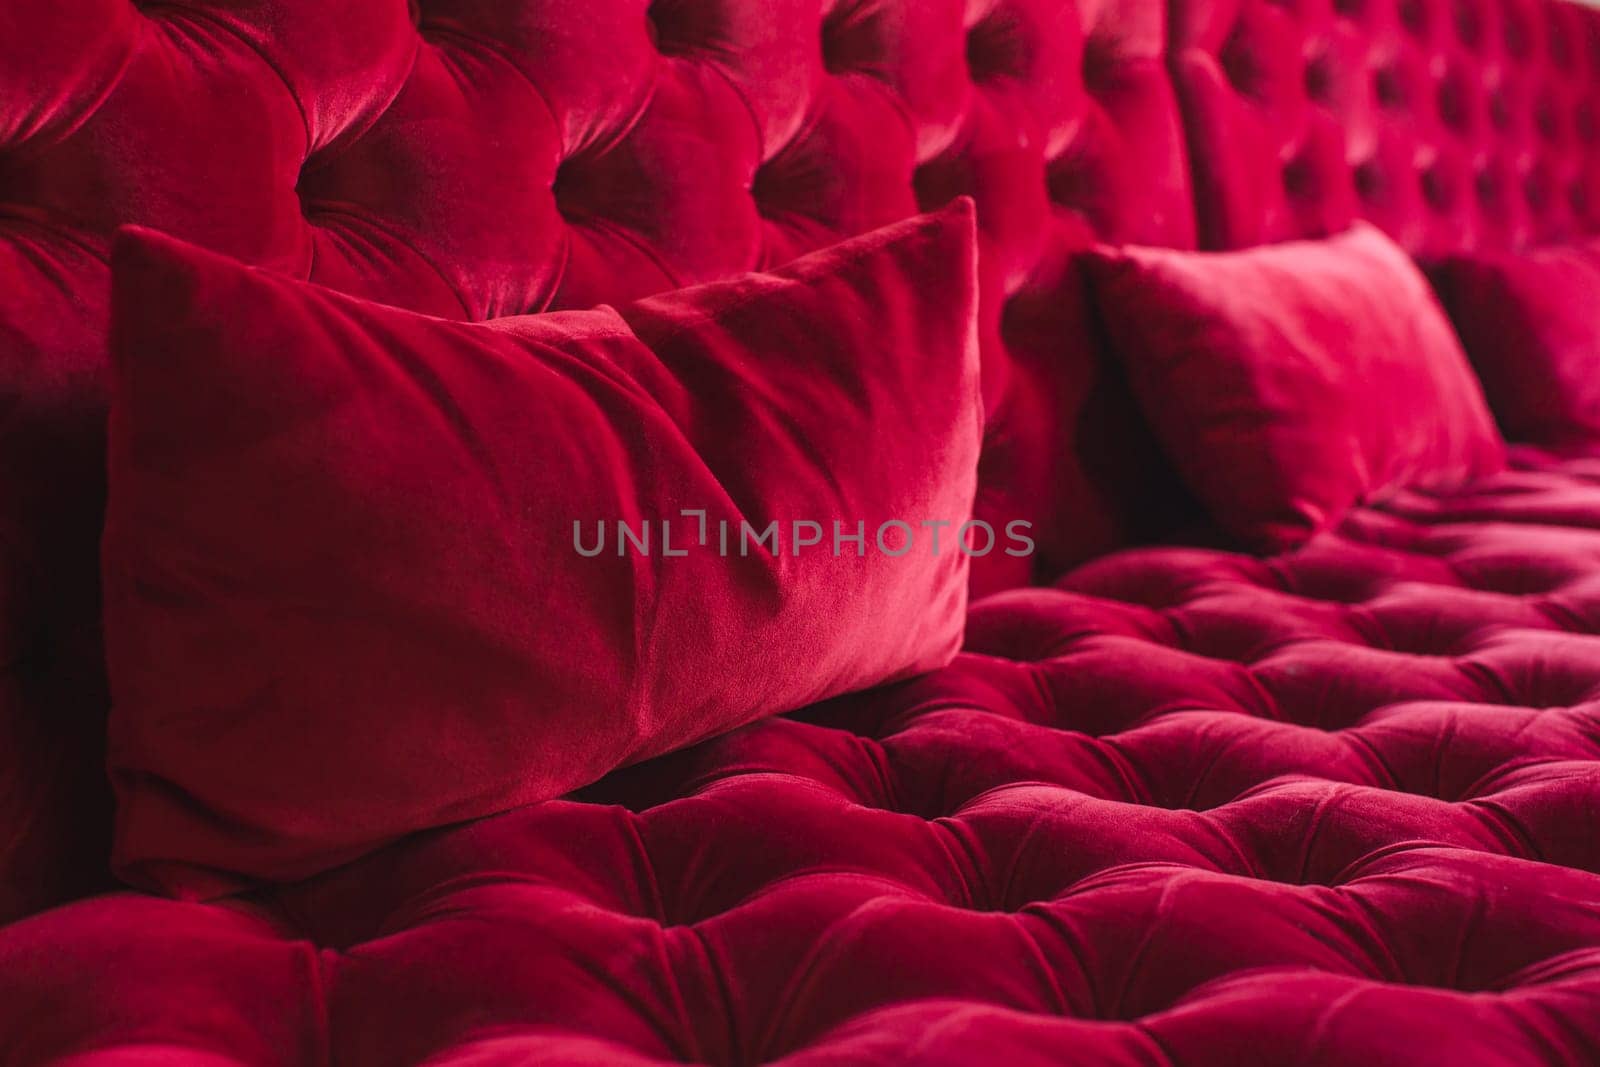 Textured surface of sofa with velour tapestry of red color close-up